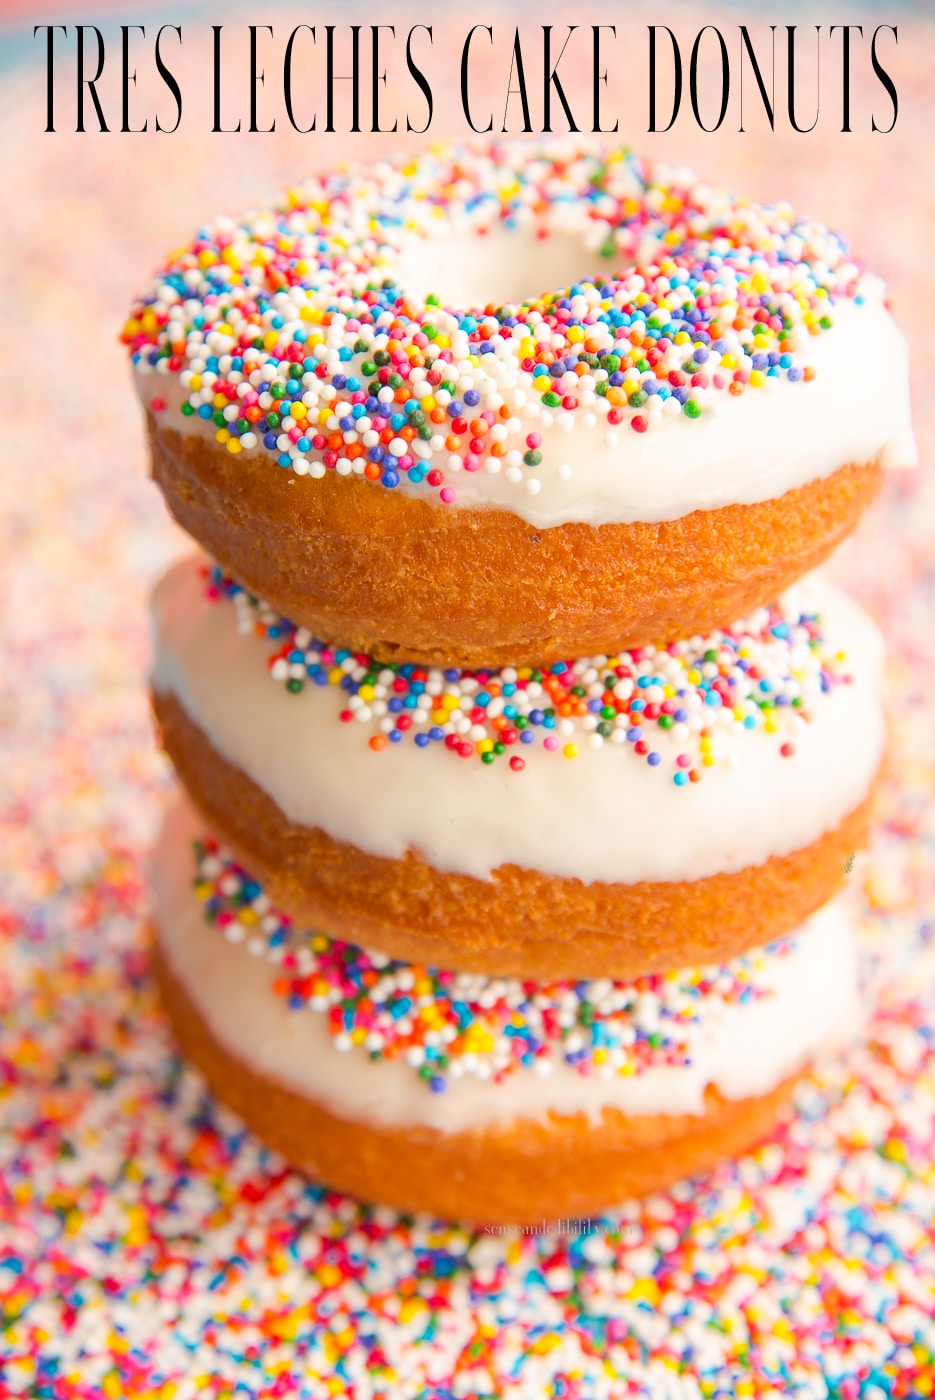 Tres Leches isn't just for cakes. Turn breakfast into a sweeter affair with these fluffy cake donuts. The three milk frosting is great on its own or topped with sprinkles. Make-ahead friendly. #tresleches #cakedonuts #treslechesdonuts #donuts #doughnuts #breakfast #kidfriendlyrecipe #recetaspuertorriquenas #recetadedonas #PuertoRicanrecipes #treslechescake #treslechescakerecipe via @ediblesense